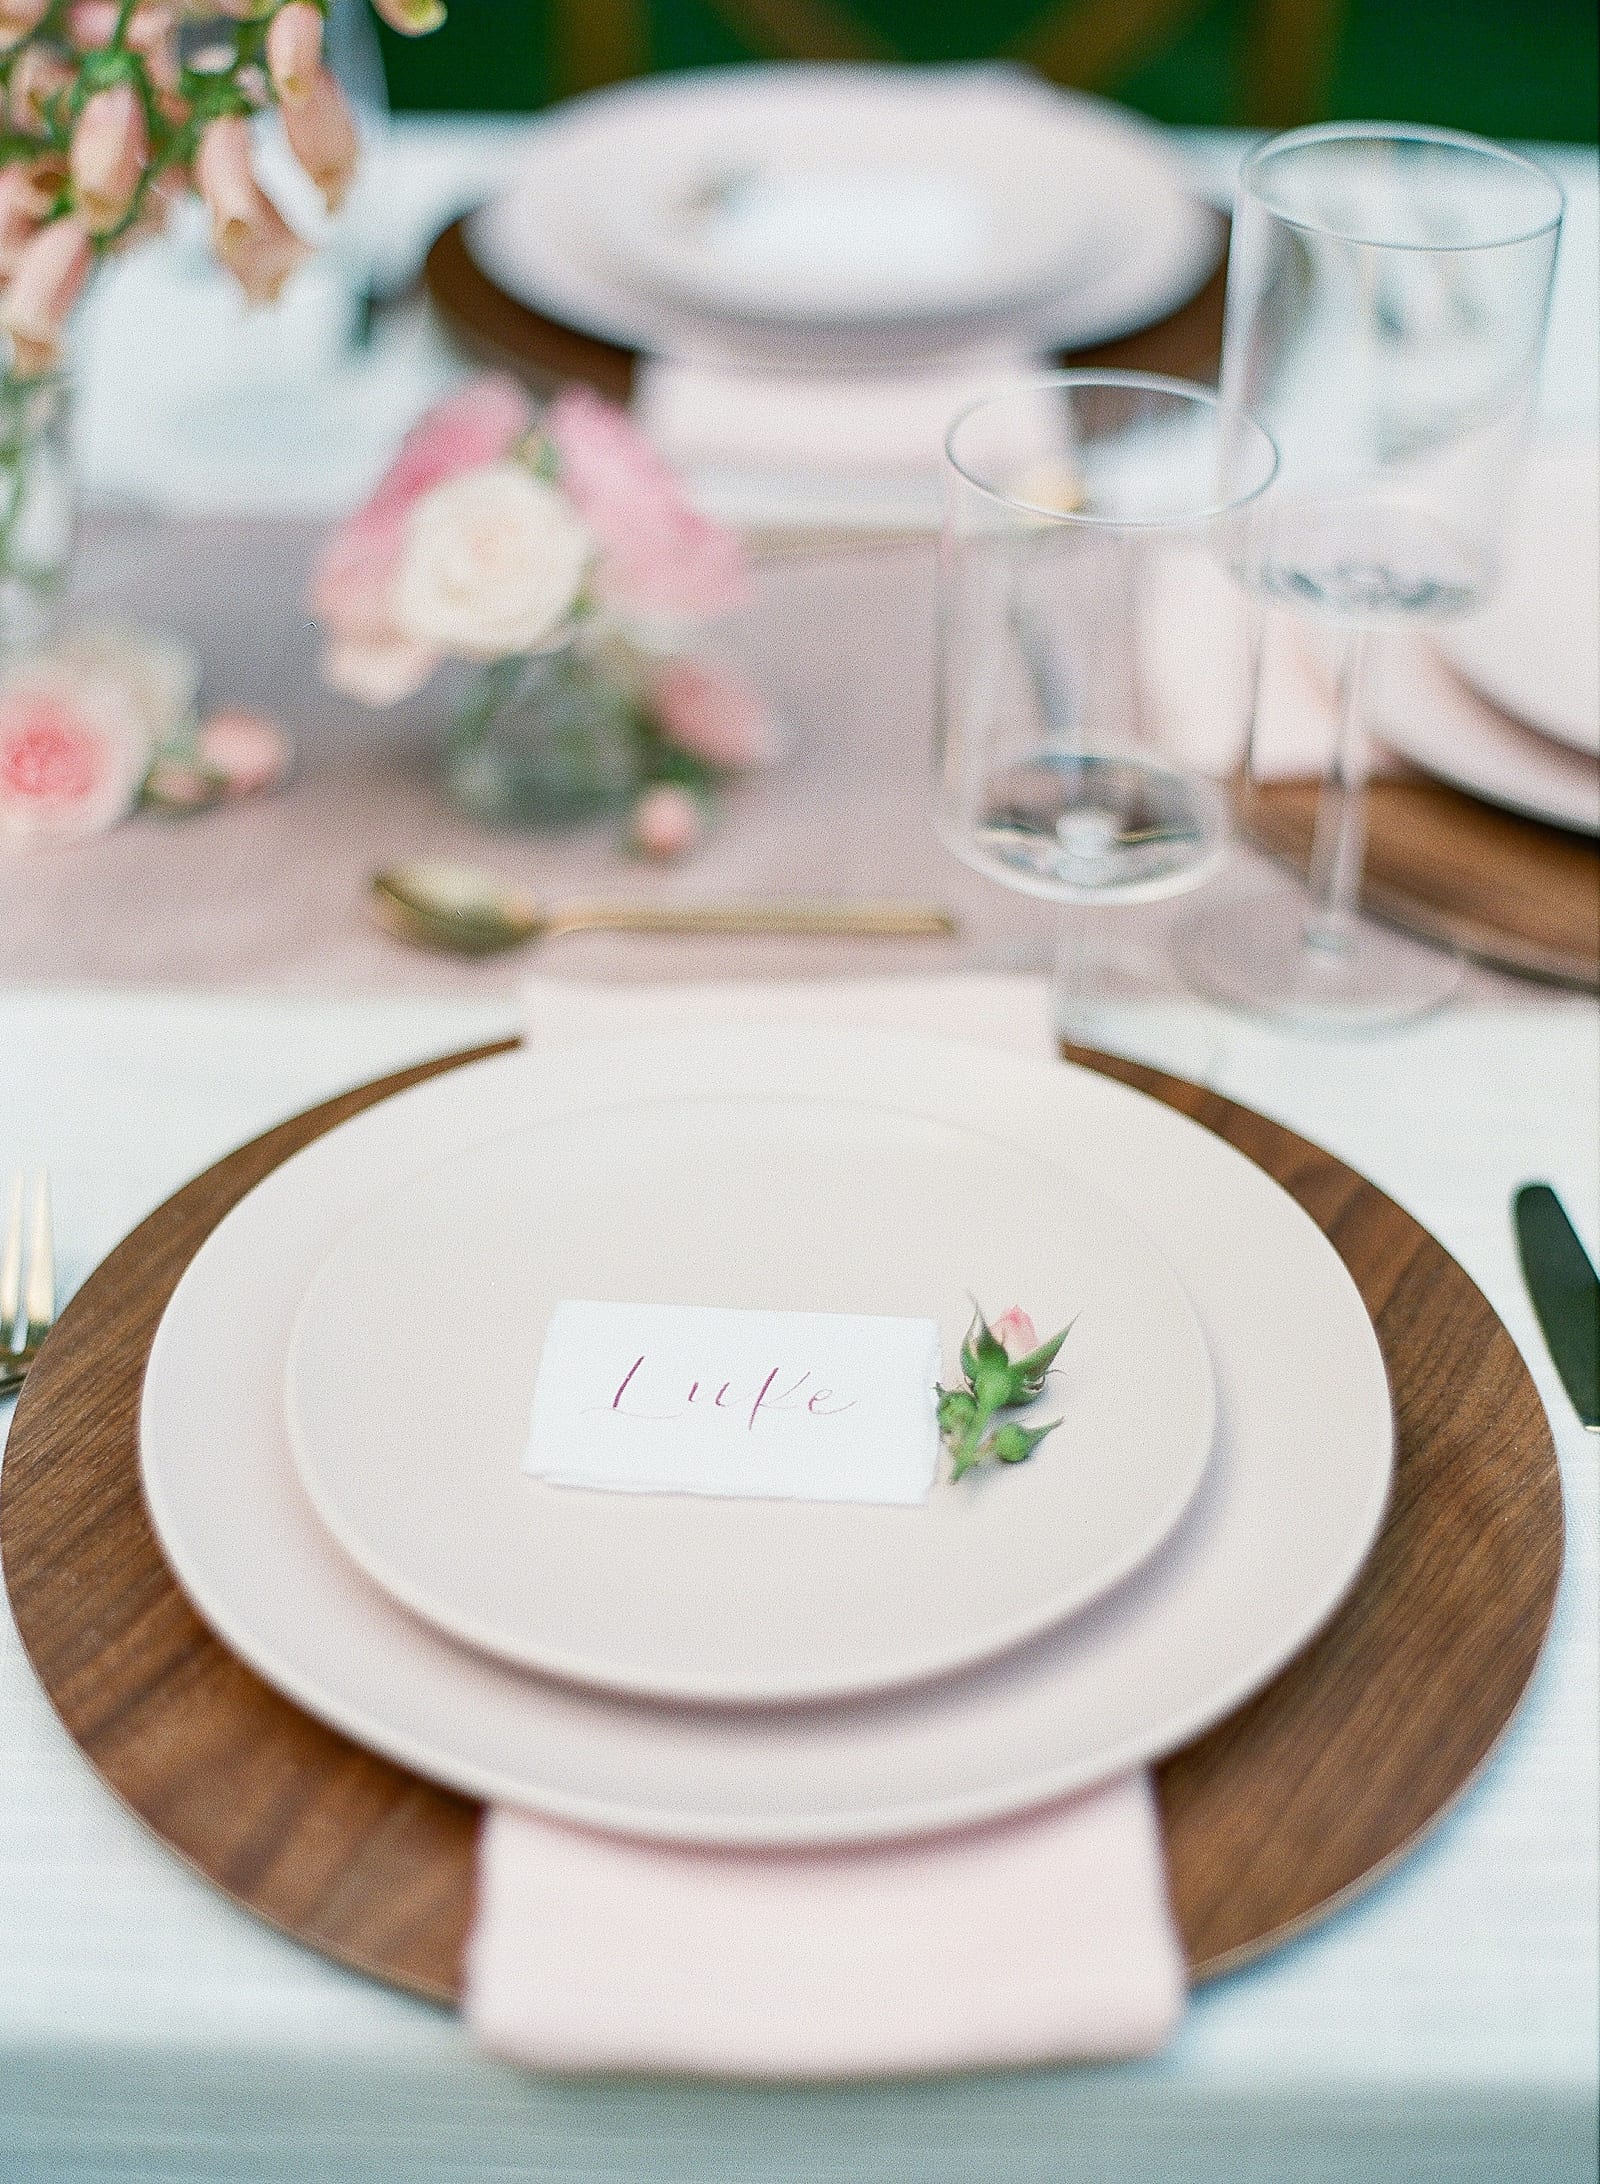 Detail of Name Card On Dinner Plates at Wedding Reception Photo 